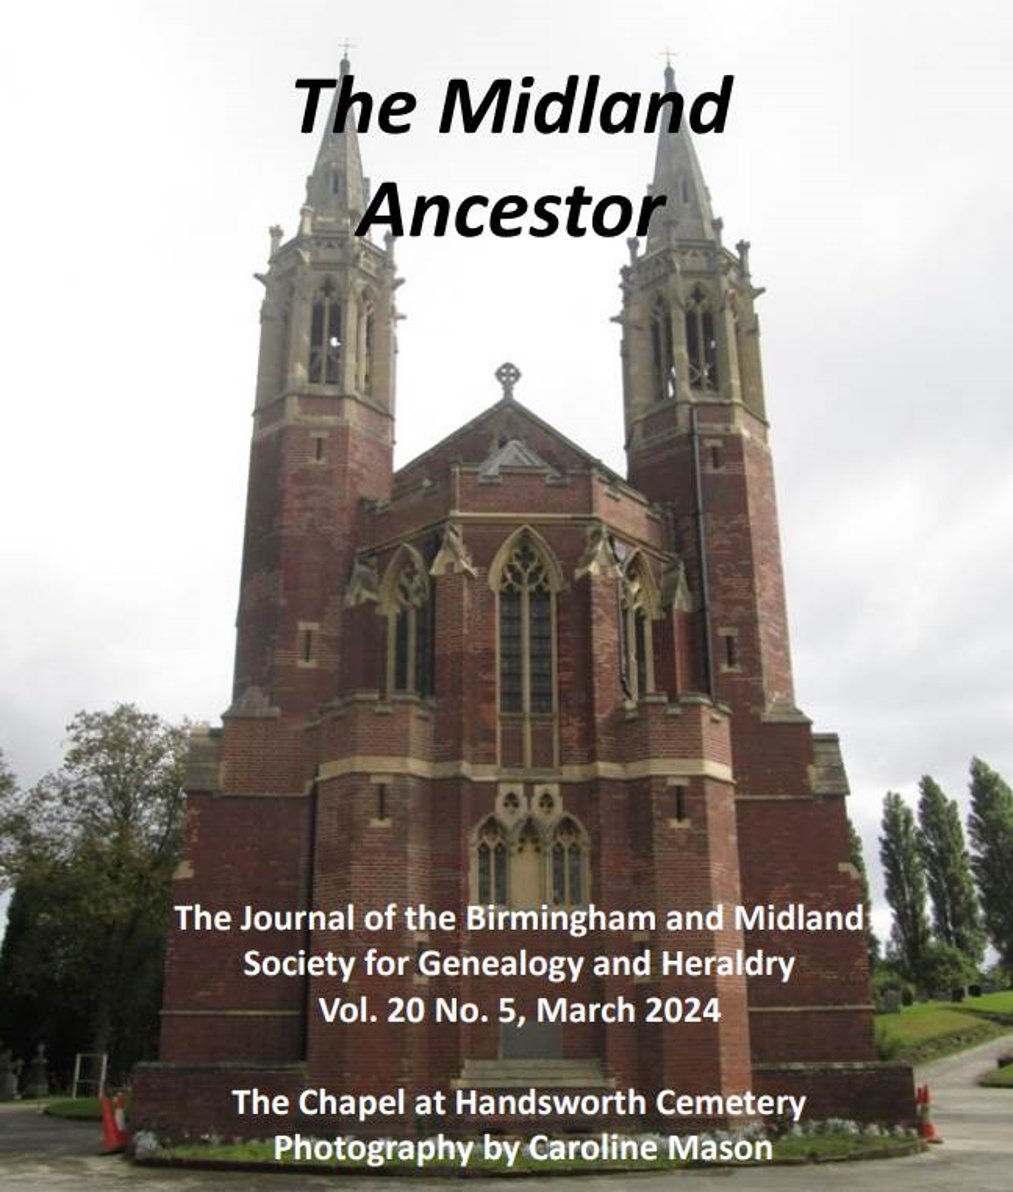 Front cover of the societies March journal, in the last few days this landed on the door mat of society members, or dropped into their inbox. Packed full of interesting articles, updates and happenings with Midland Ancestors. Website - midland-ancestors.uk